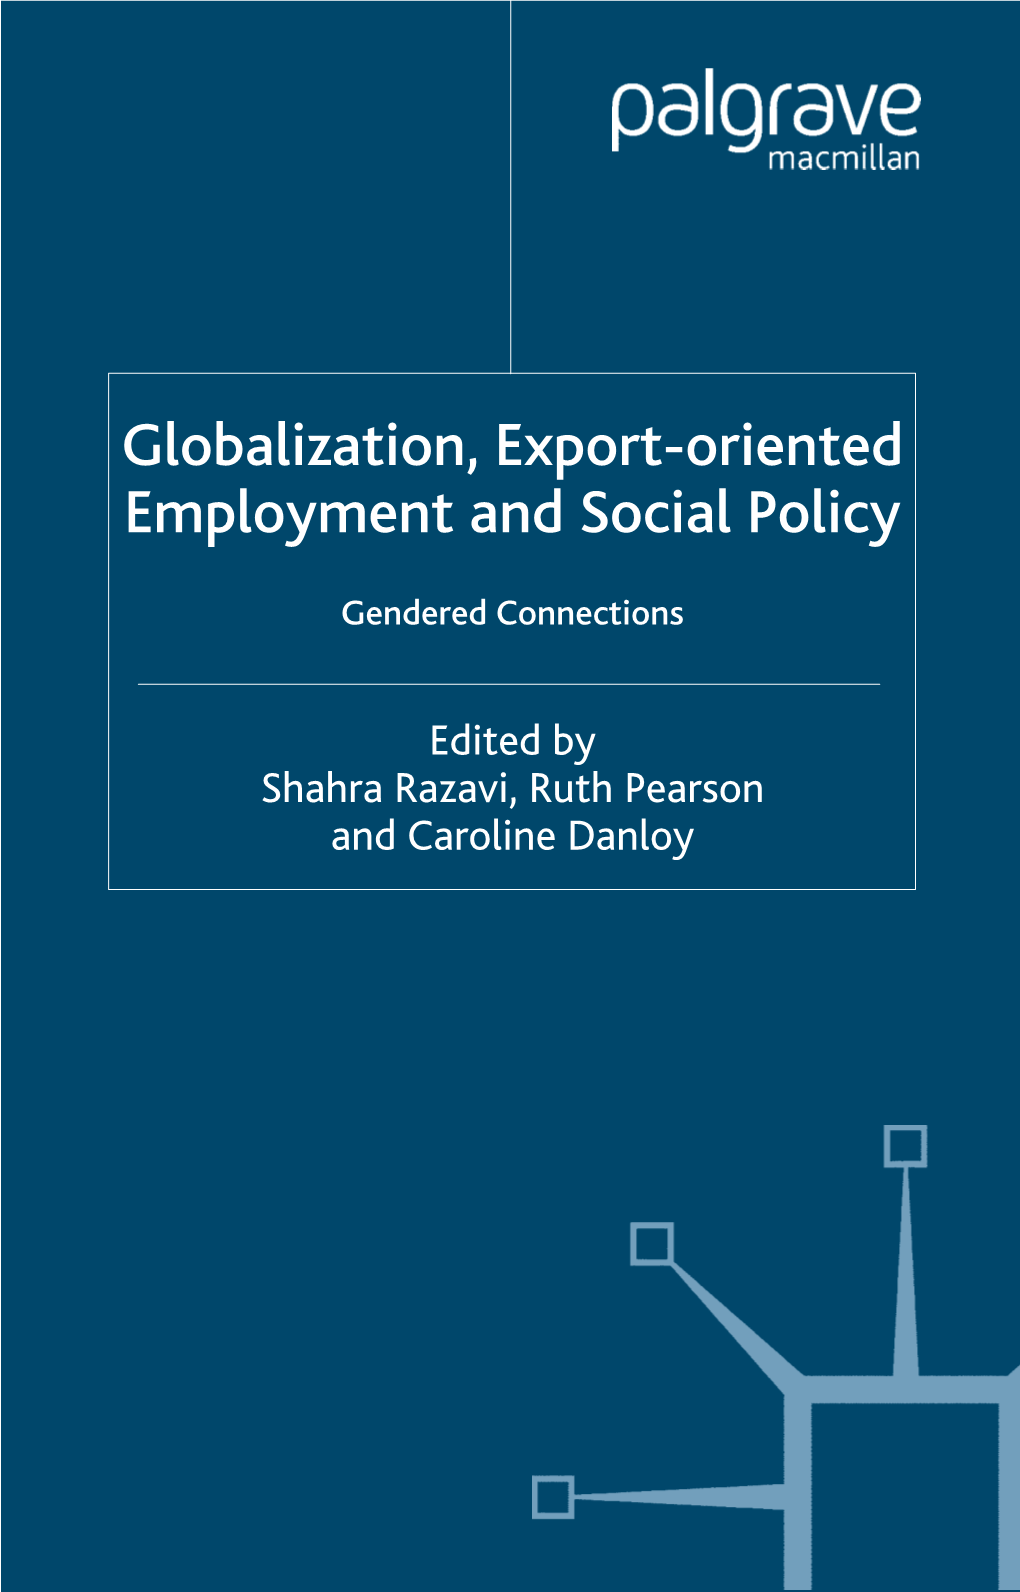 Globalization, Export-Oriented Employment and Social Policy